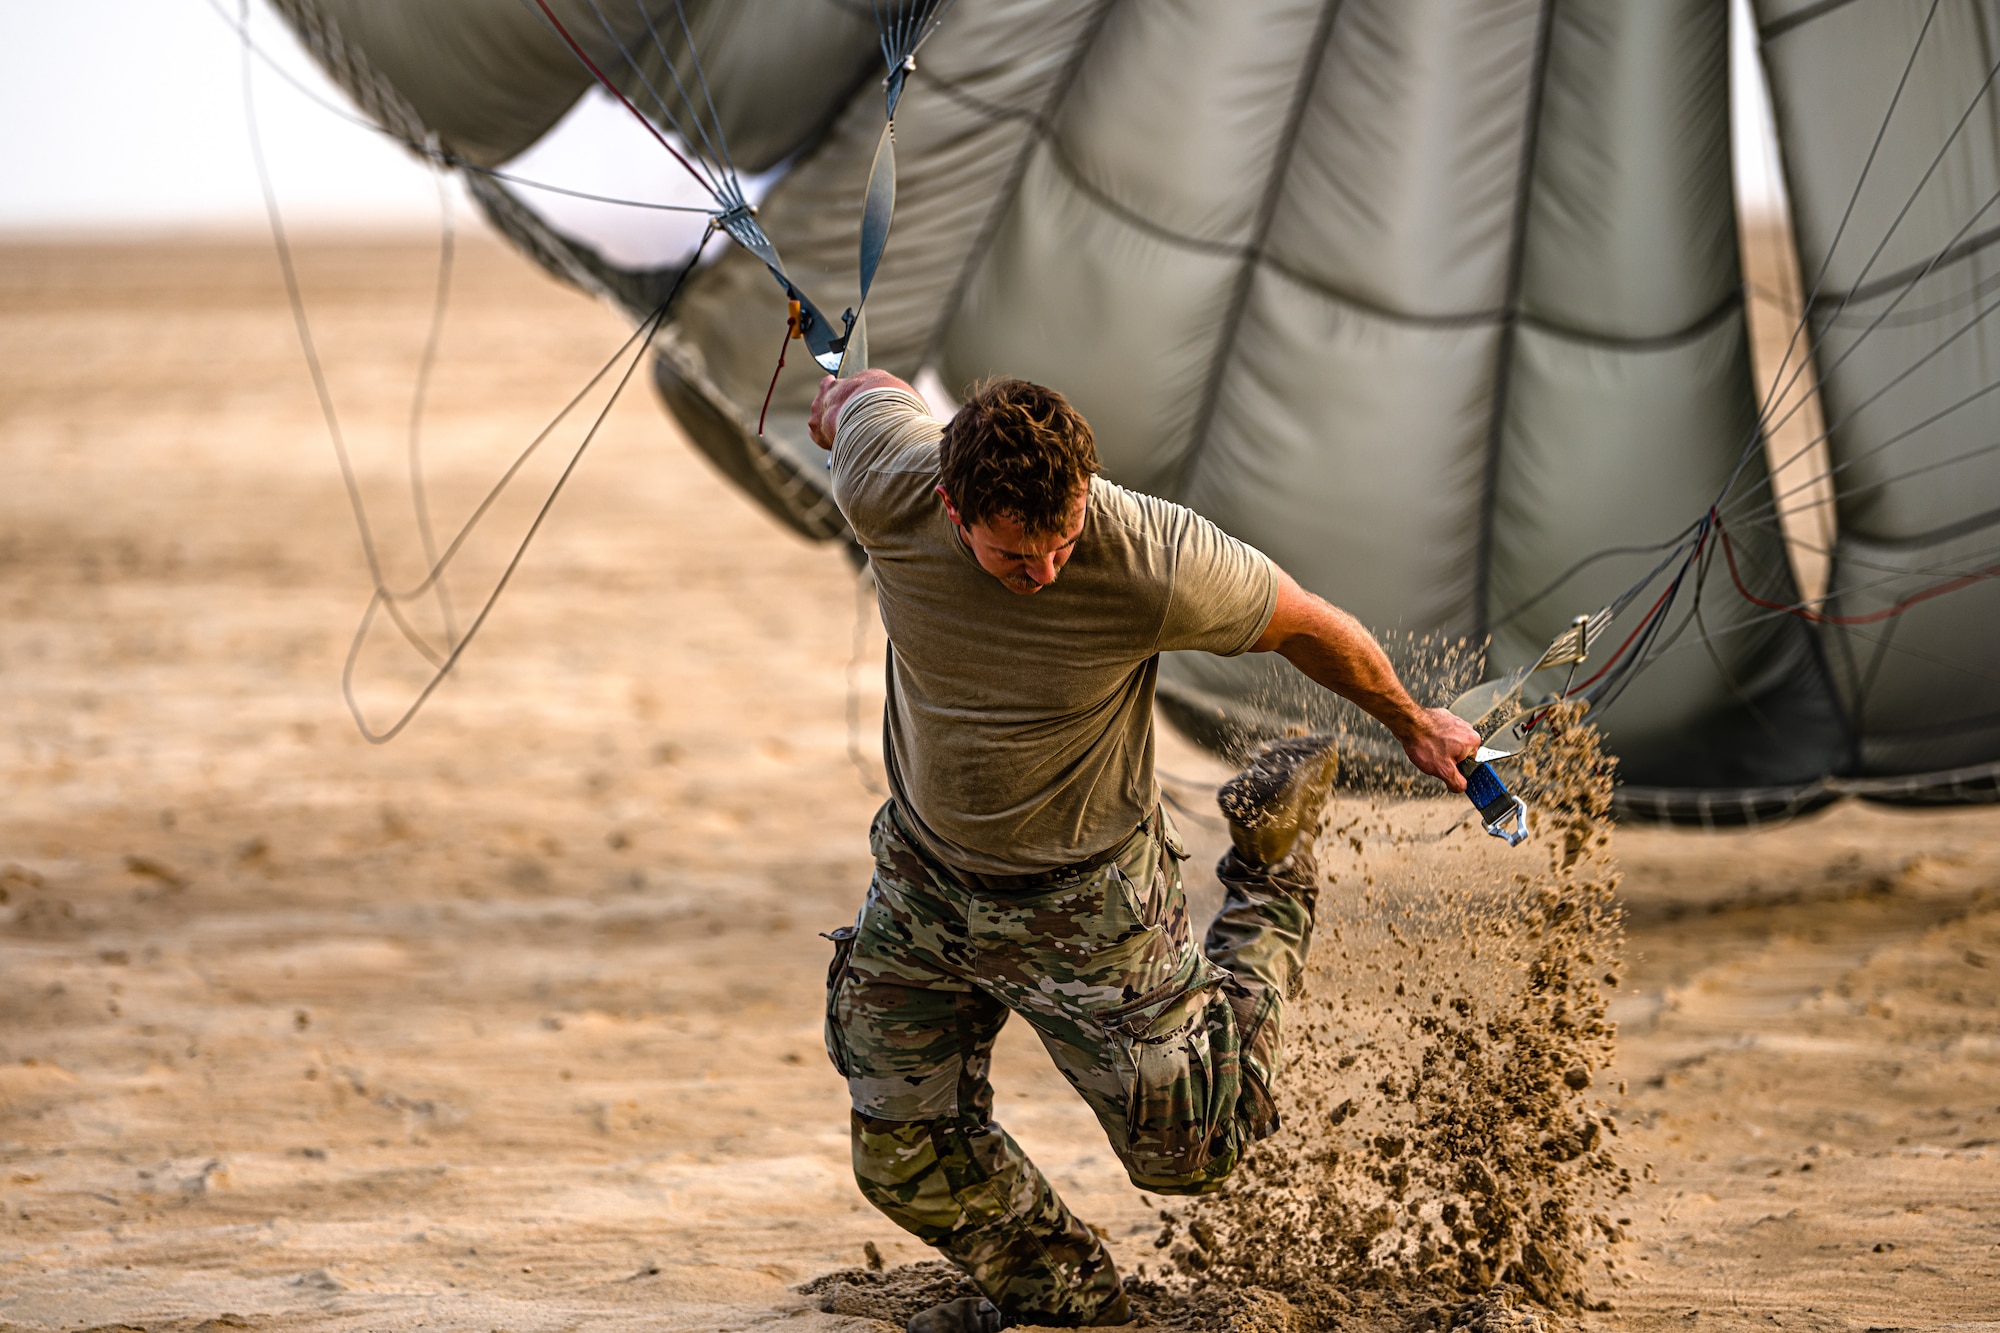 Military member kicking sand up while dragging a parachute through the desert